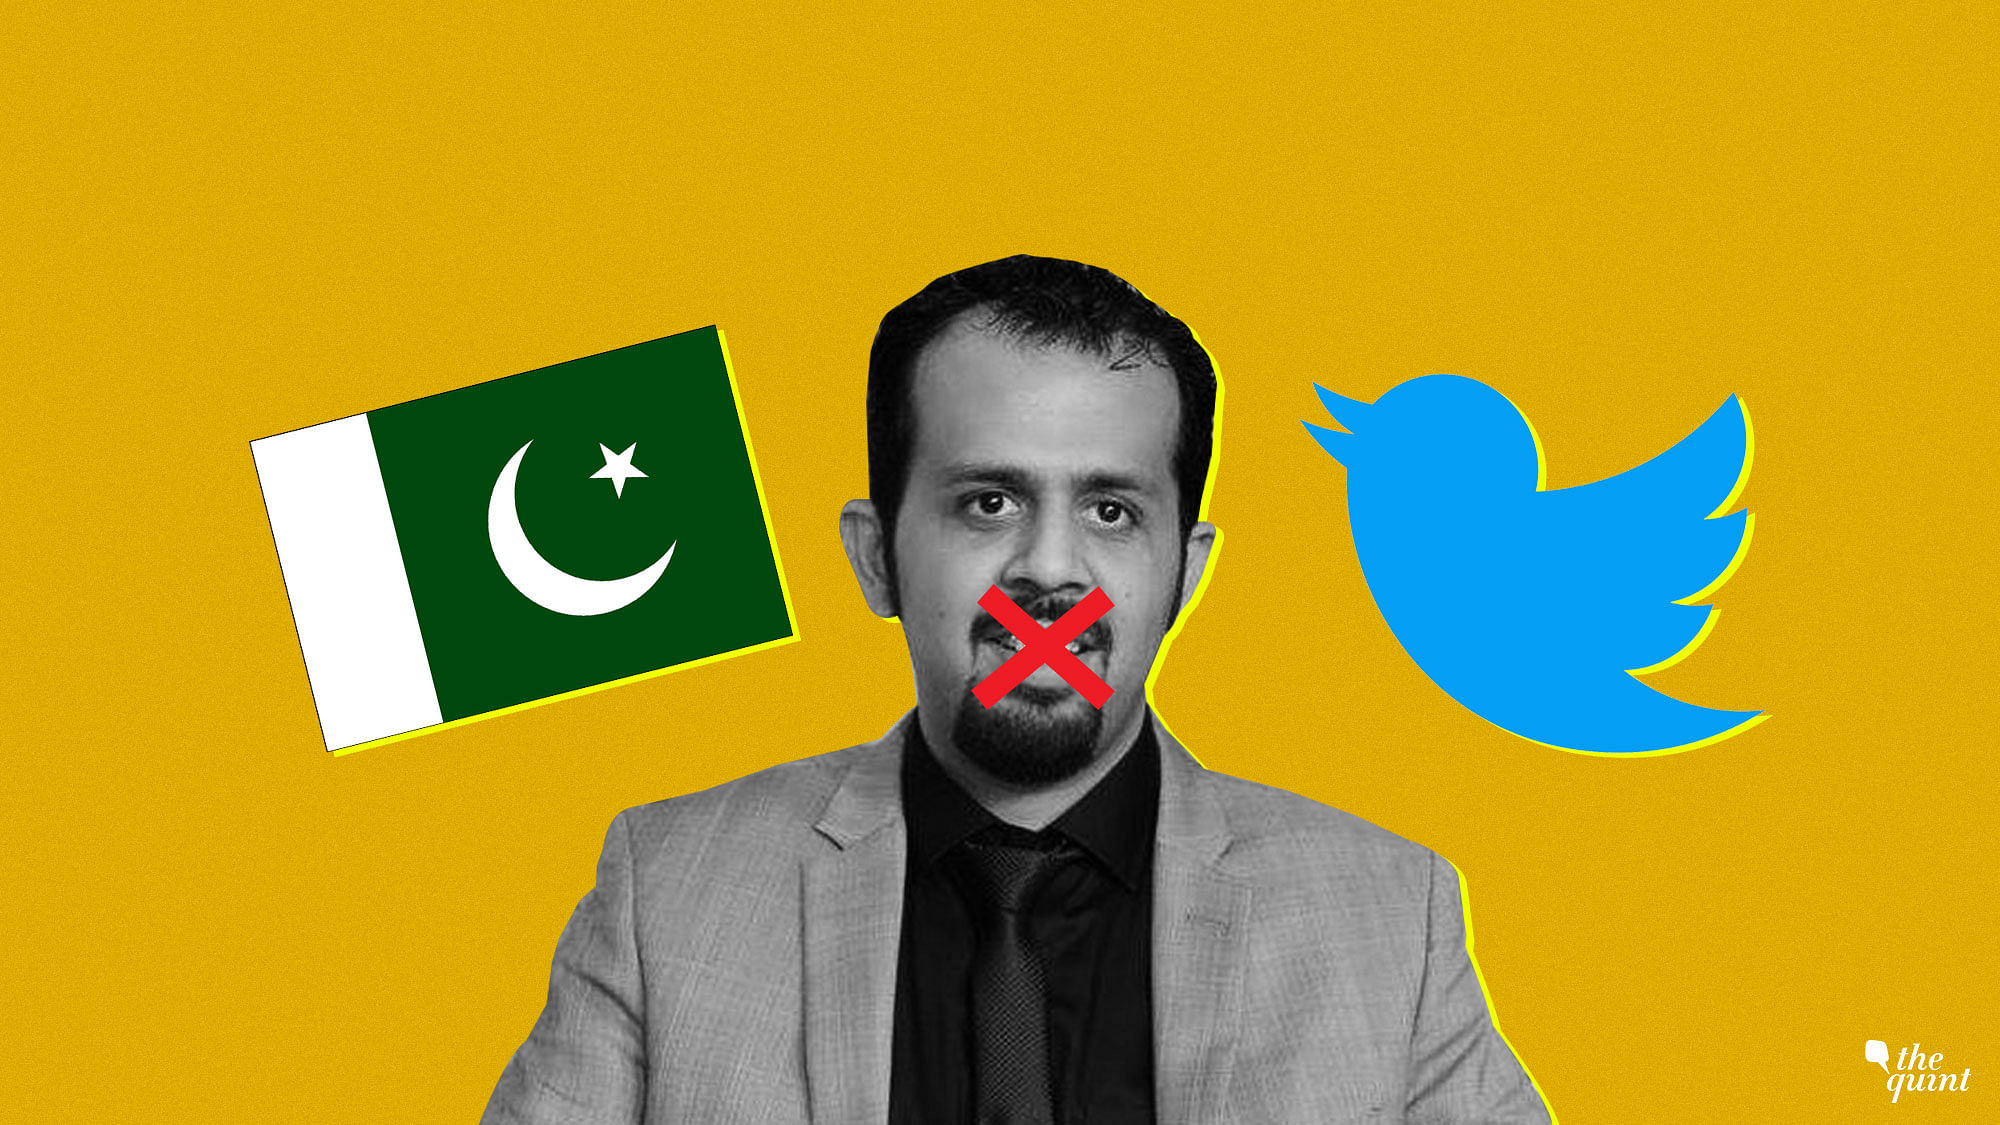 Twitter is asking Pakistani journalists and activists to fall in line with the country’s government.